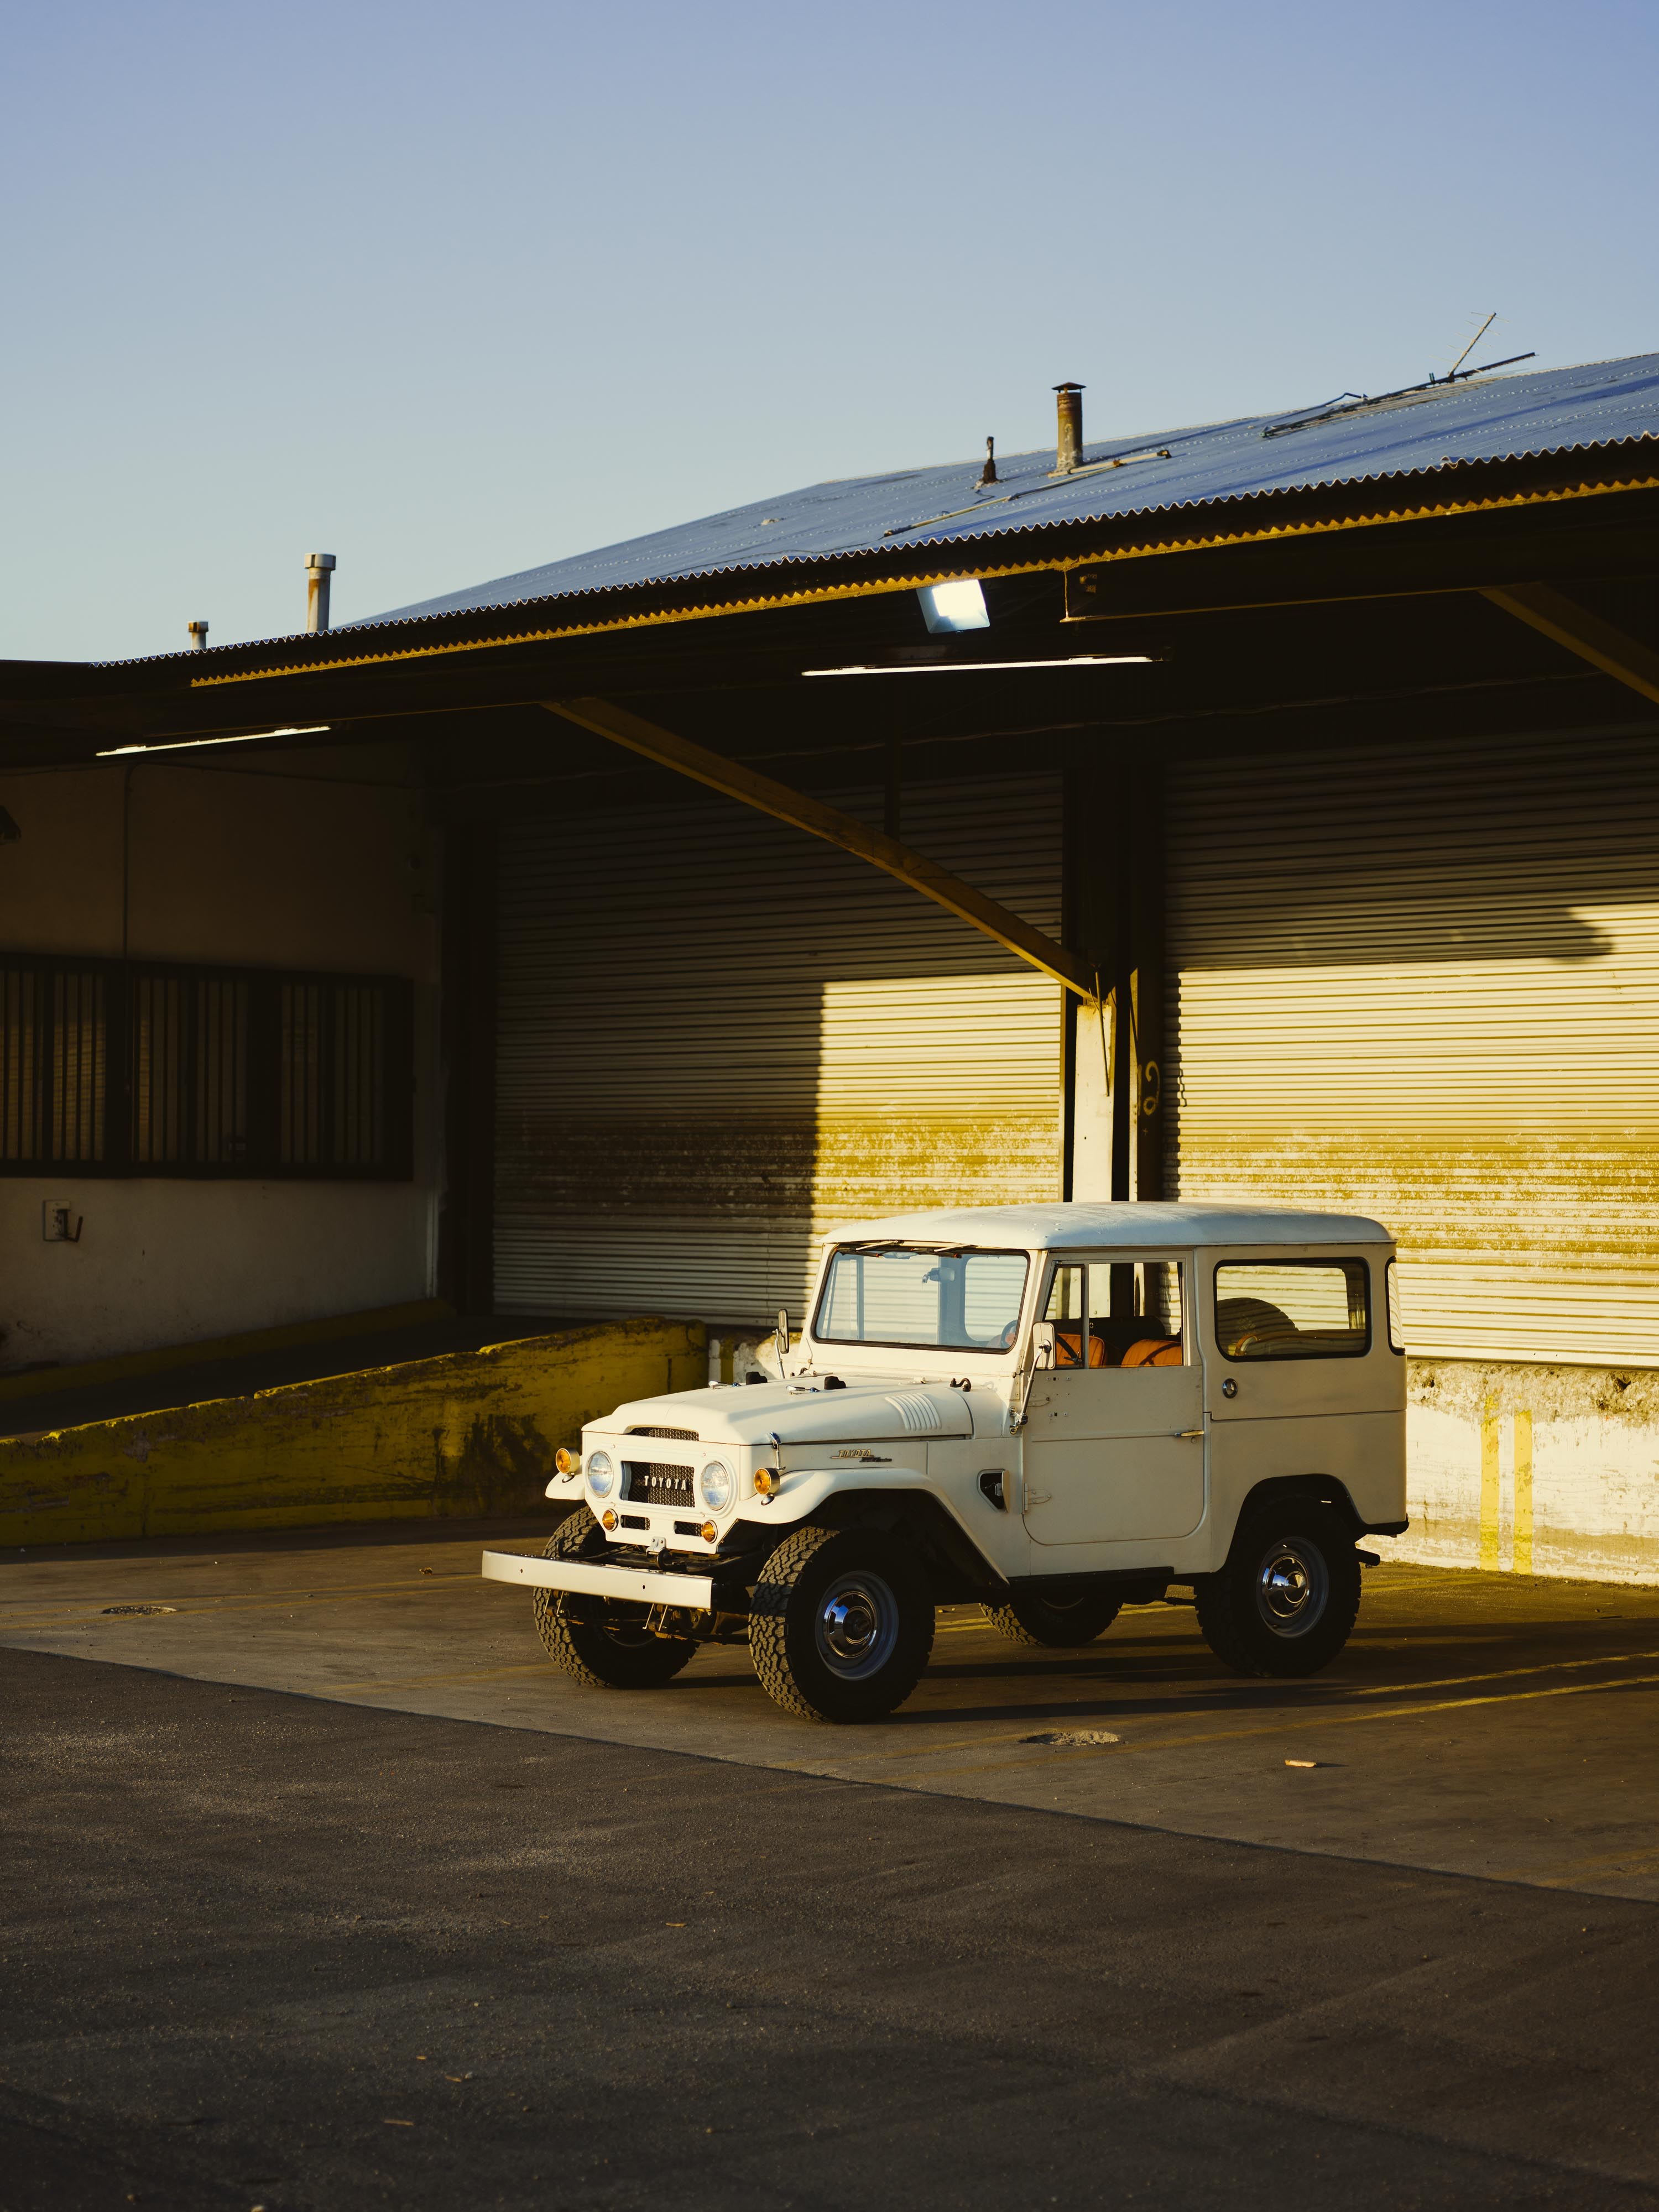 Jeff Stockwell | Film style photography of Vintage Cars in Los Angeles, CA 